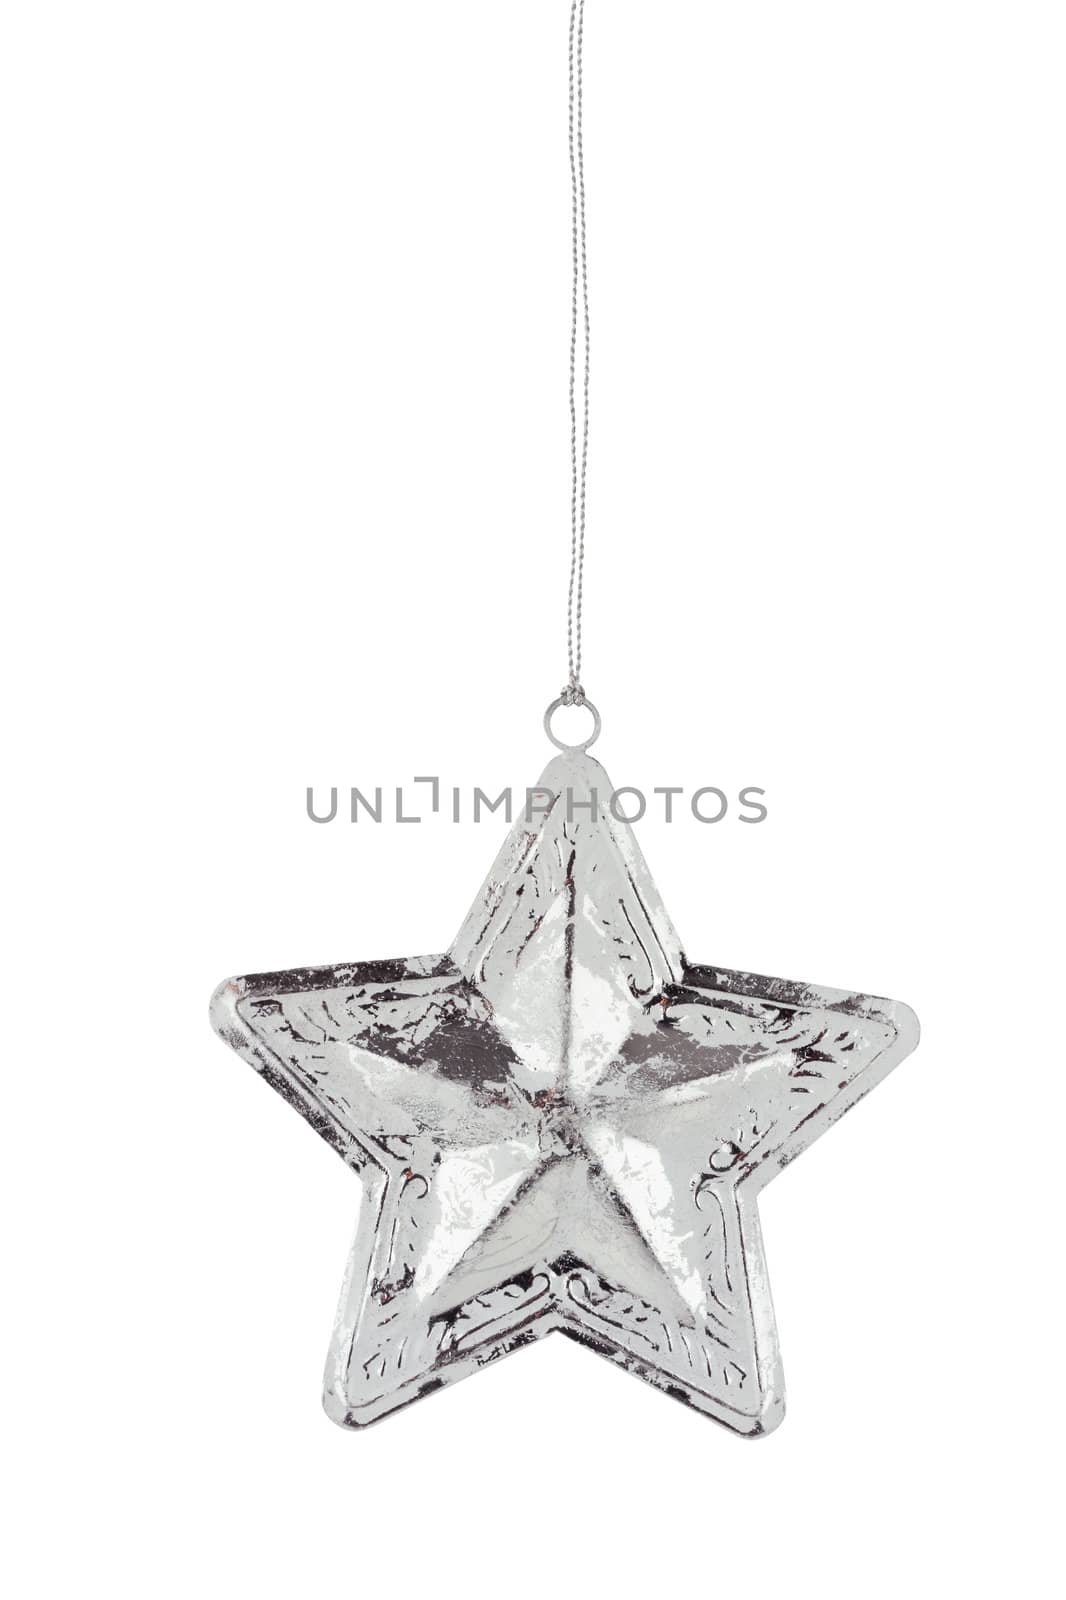 Silver Christmas star ornament isolated on a white background with clipping path included. 